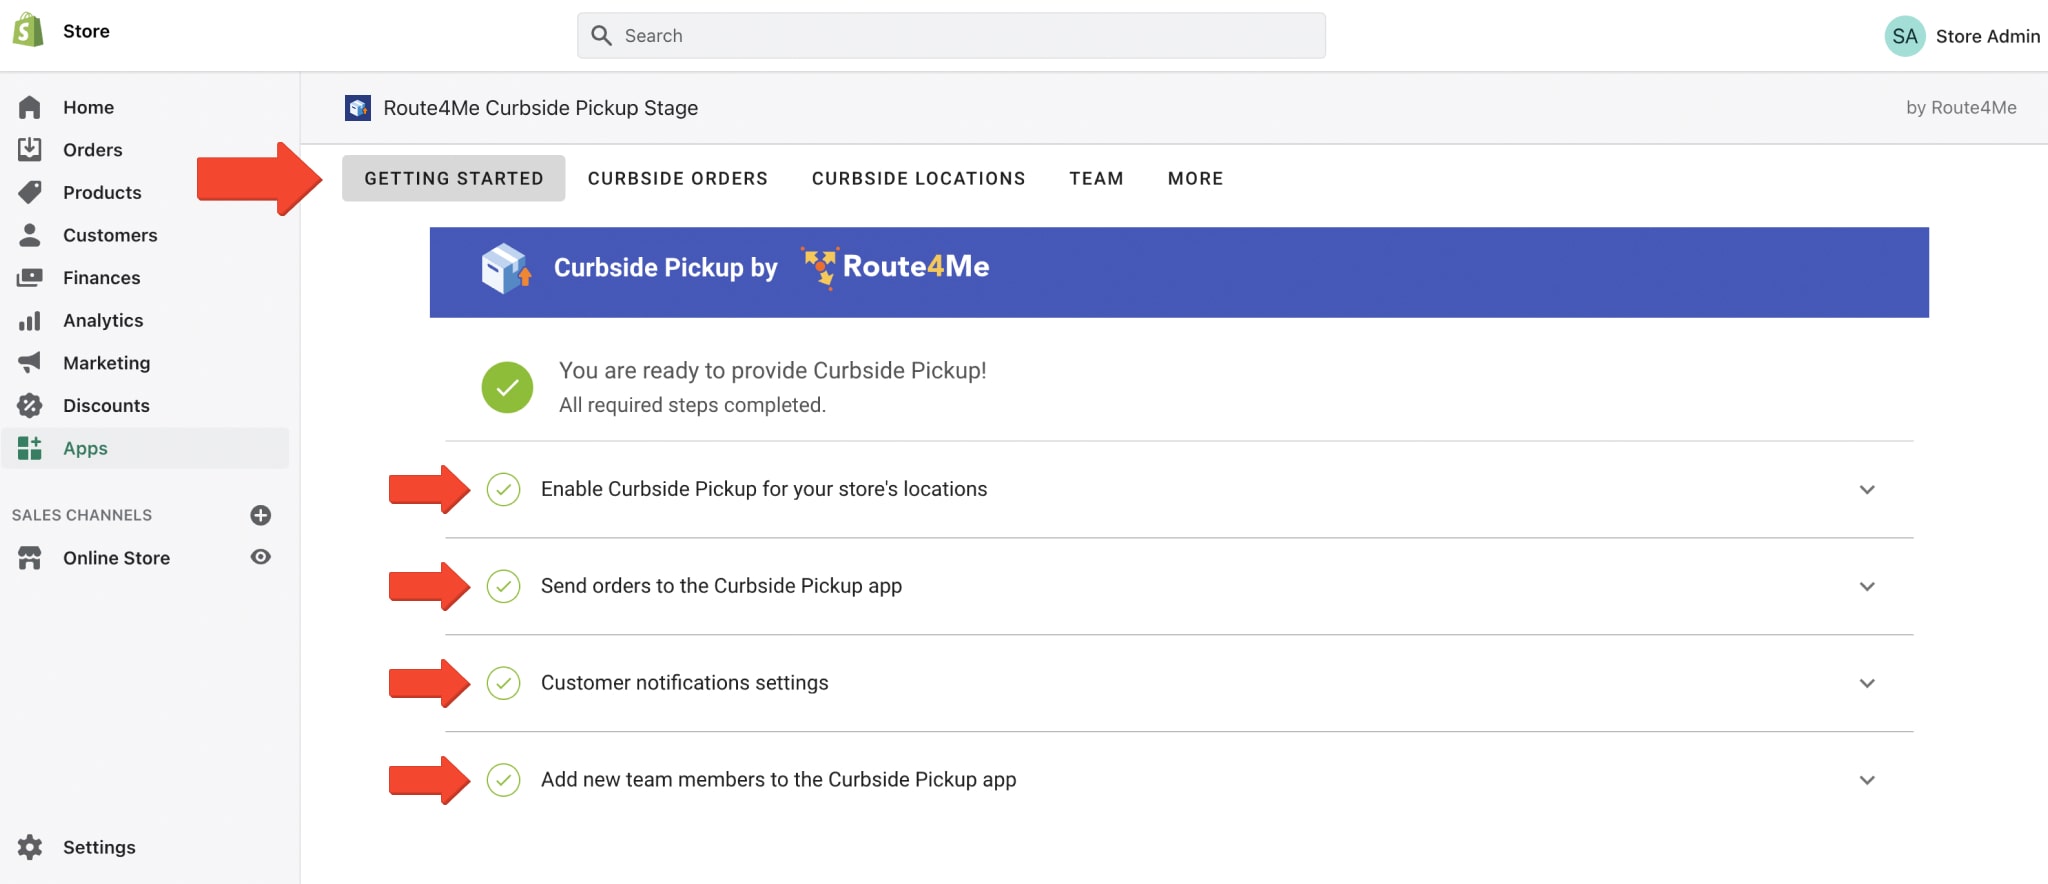 Set up and adjust the Shopify Curbside Pickup and Store Collet app settings for your store.